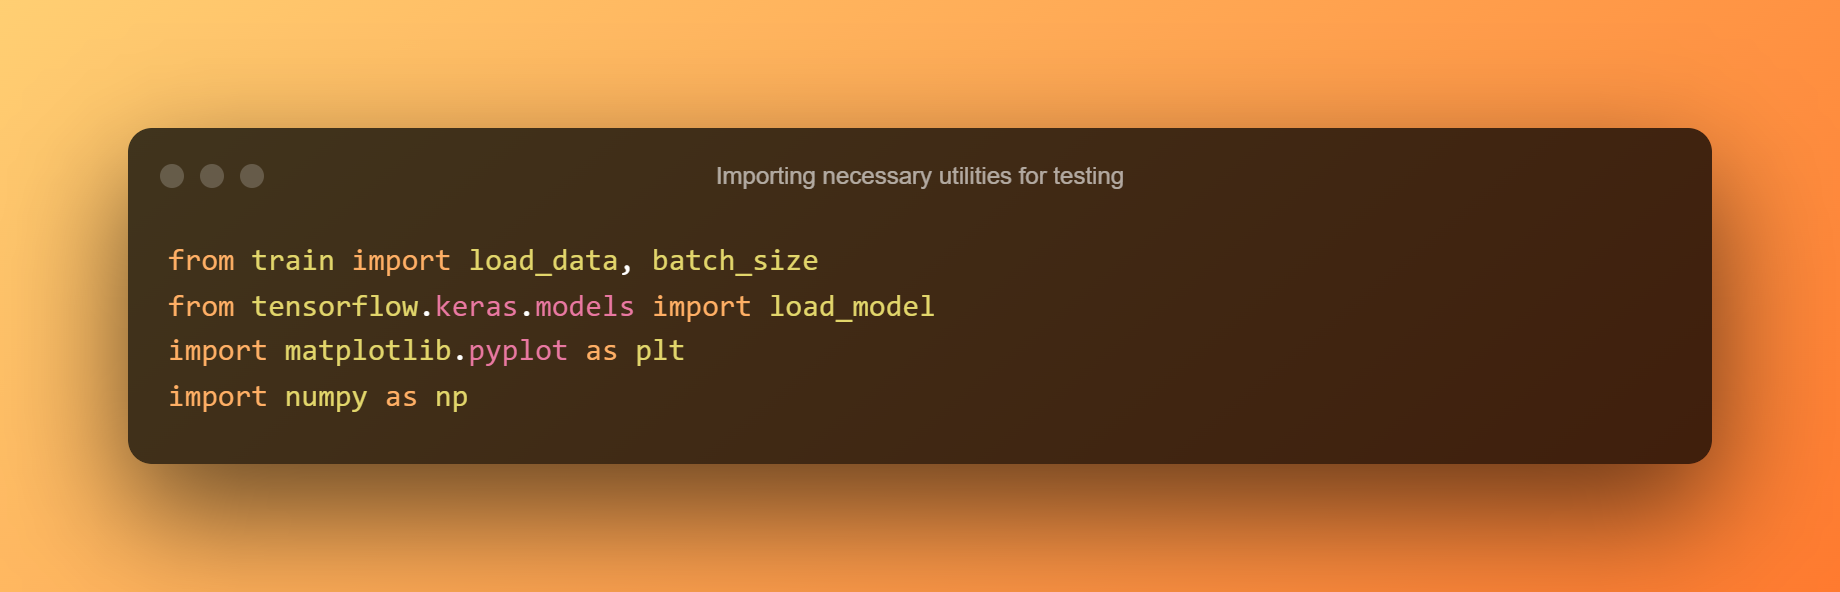 Importing Necessary Utilities For Testing